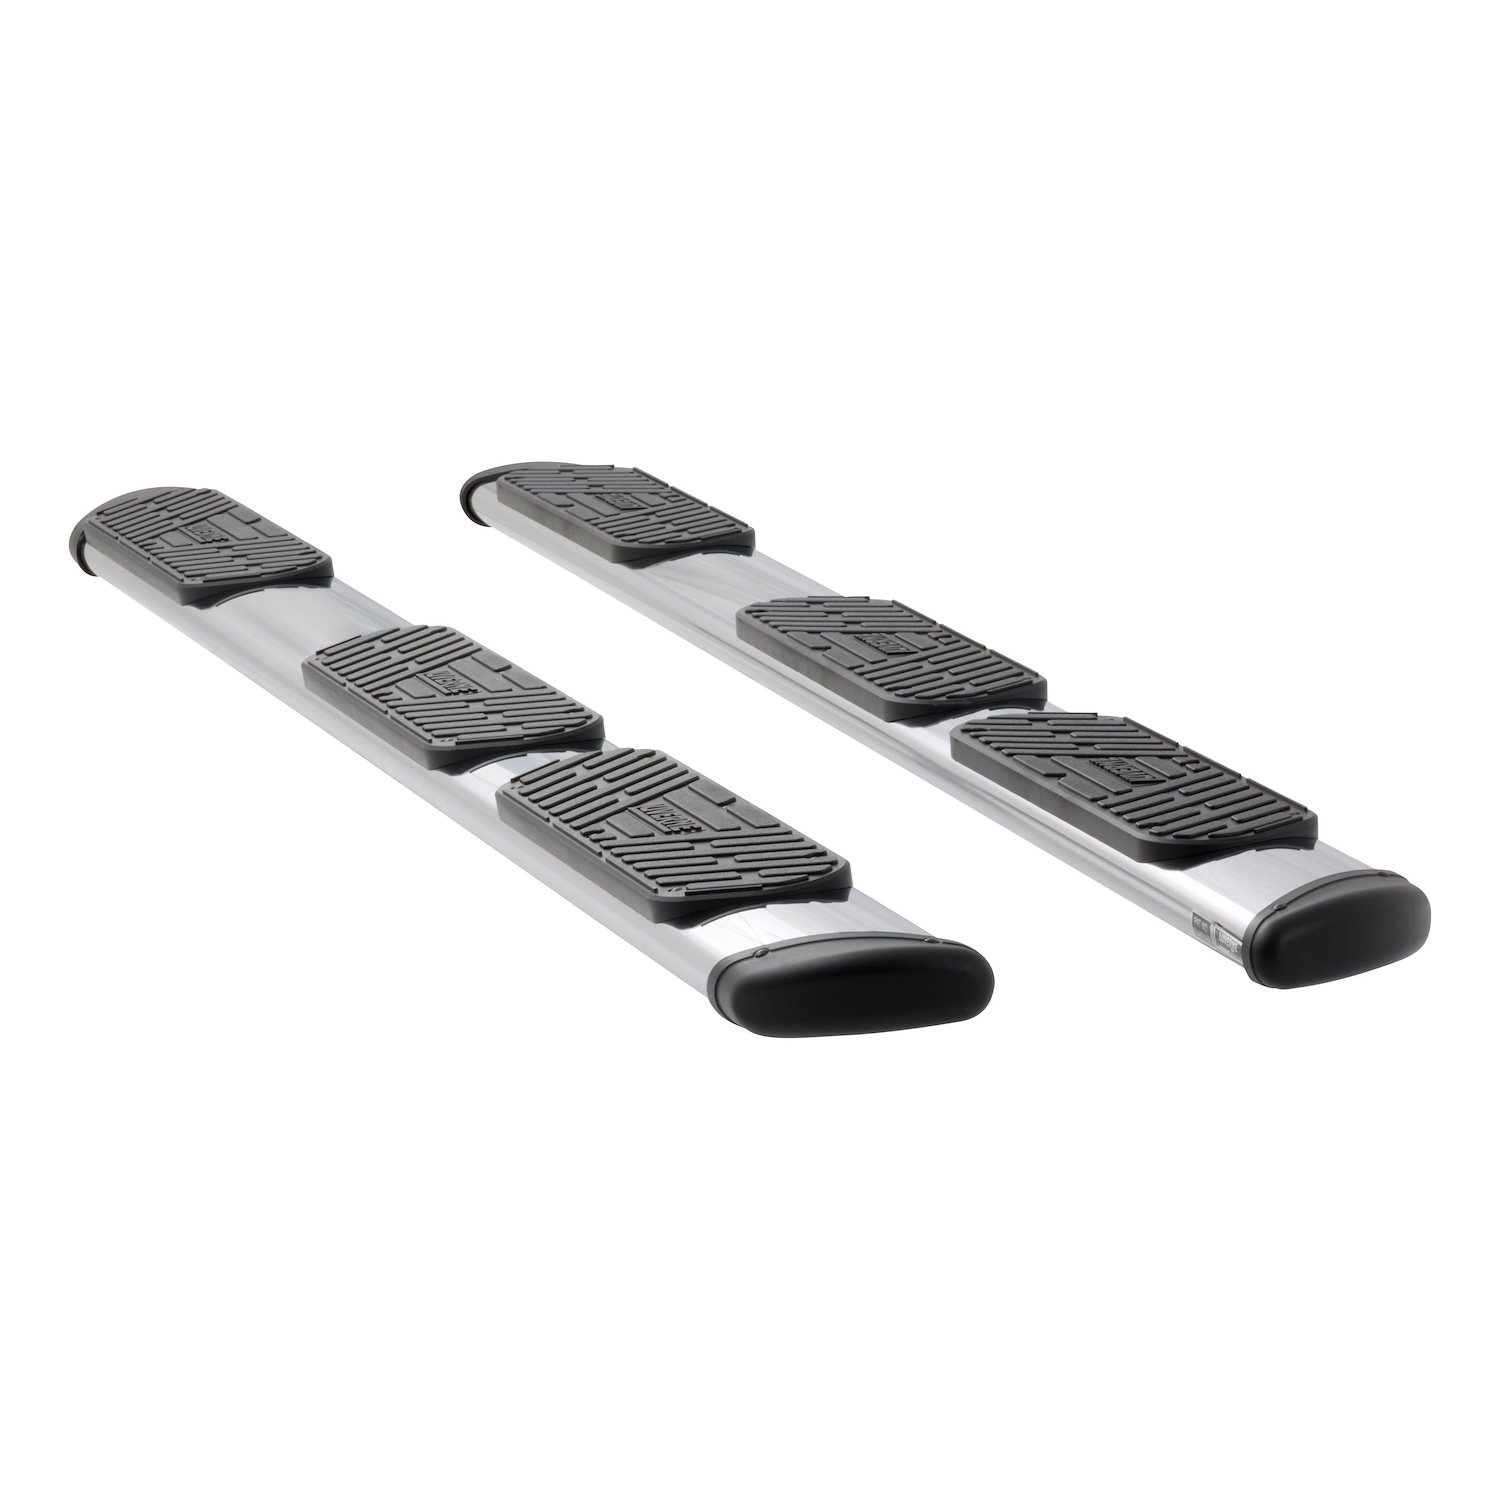 477113-400829 Regal 7 Polished Stainless 113 in. Oval W2W Steps Fits Select Ford F-250, F-350